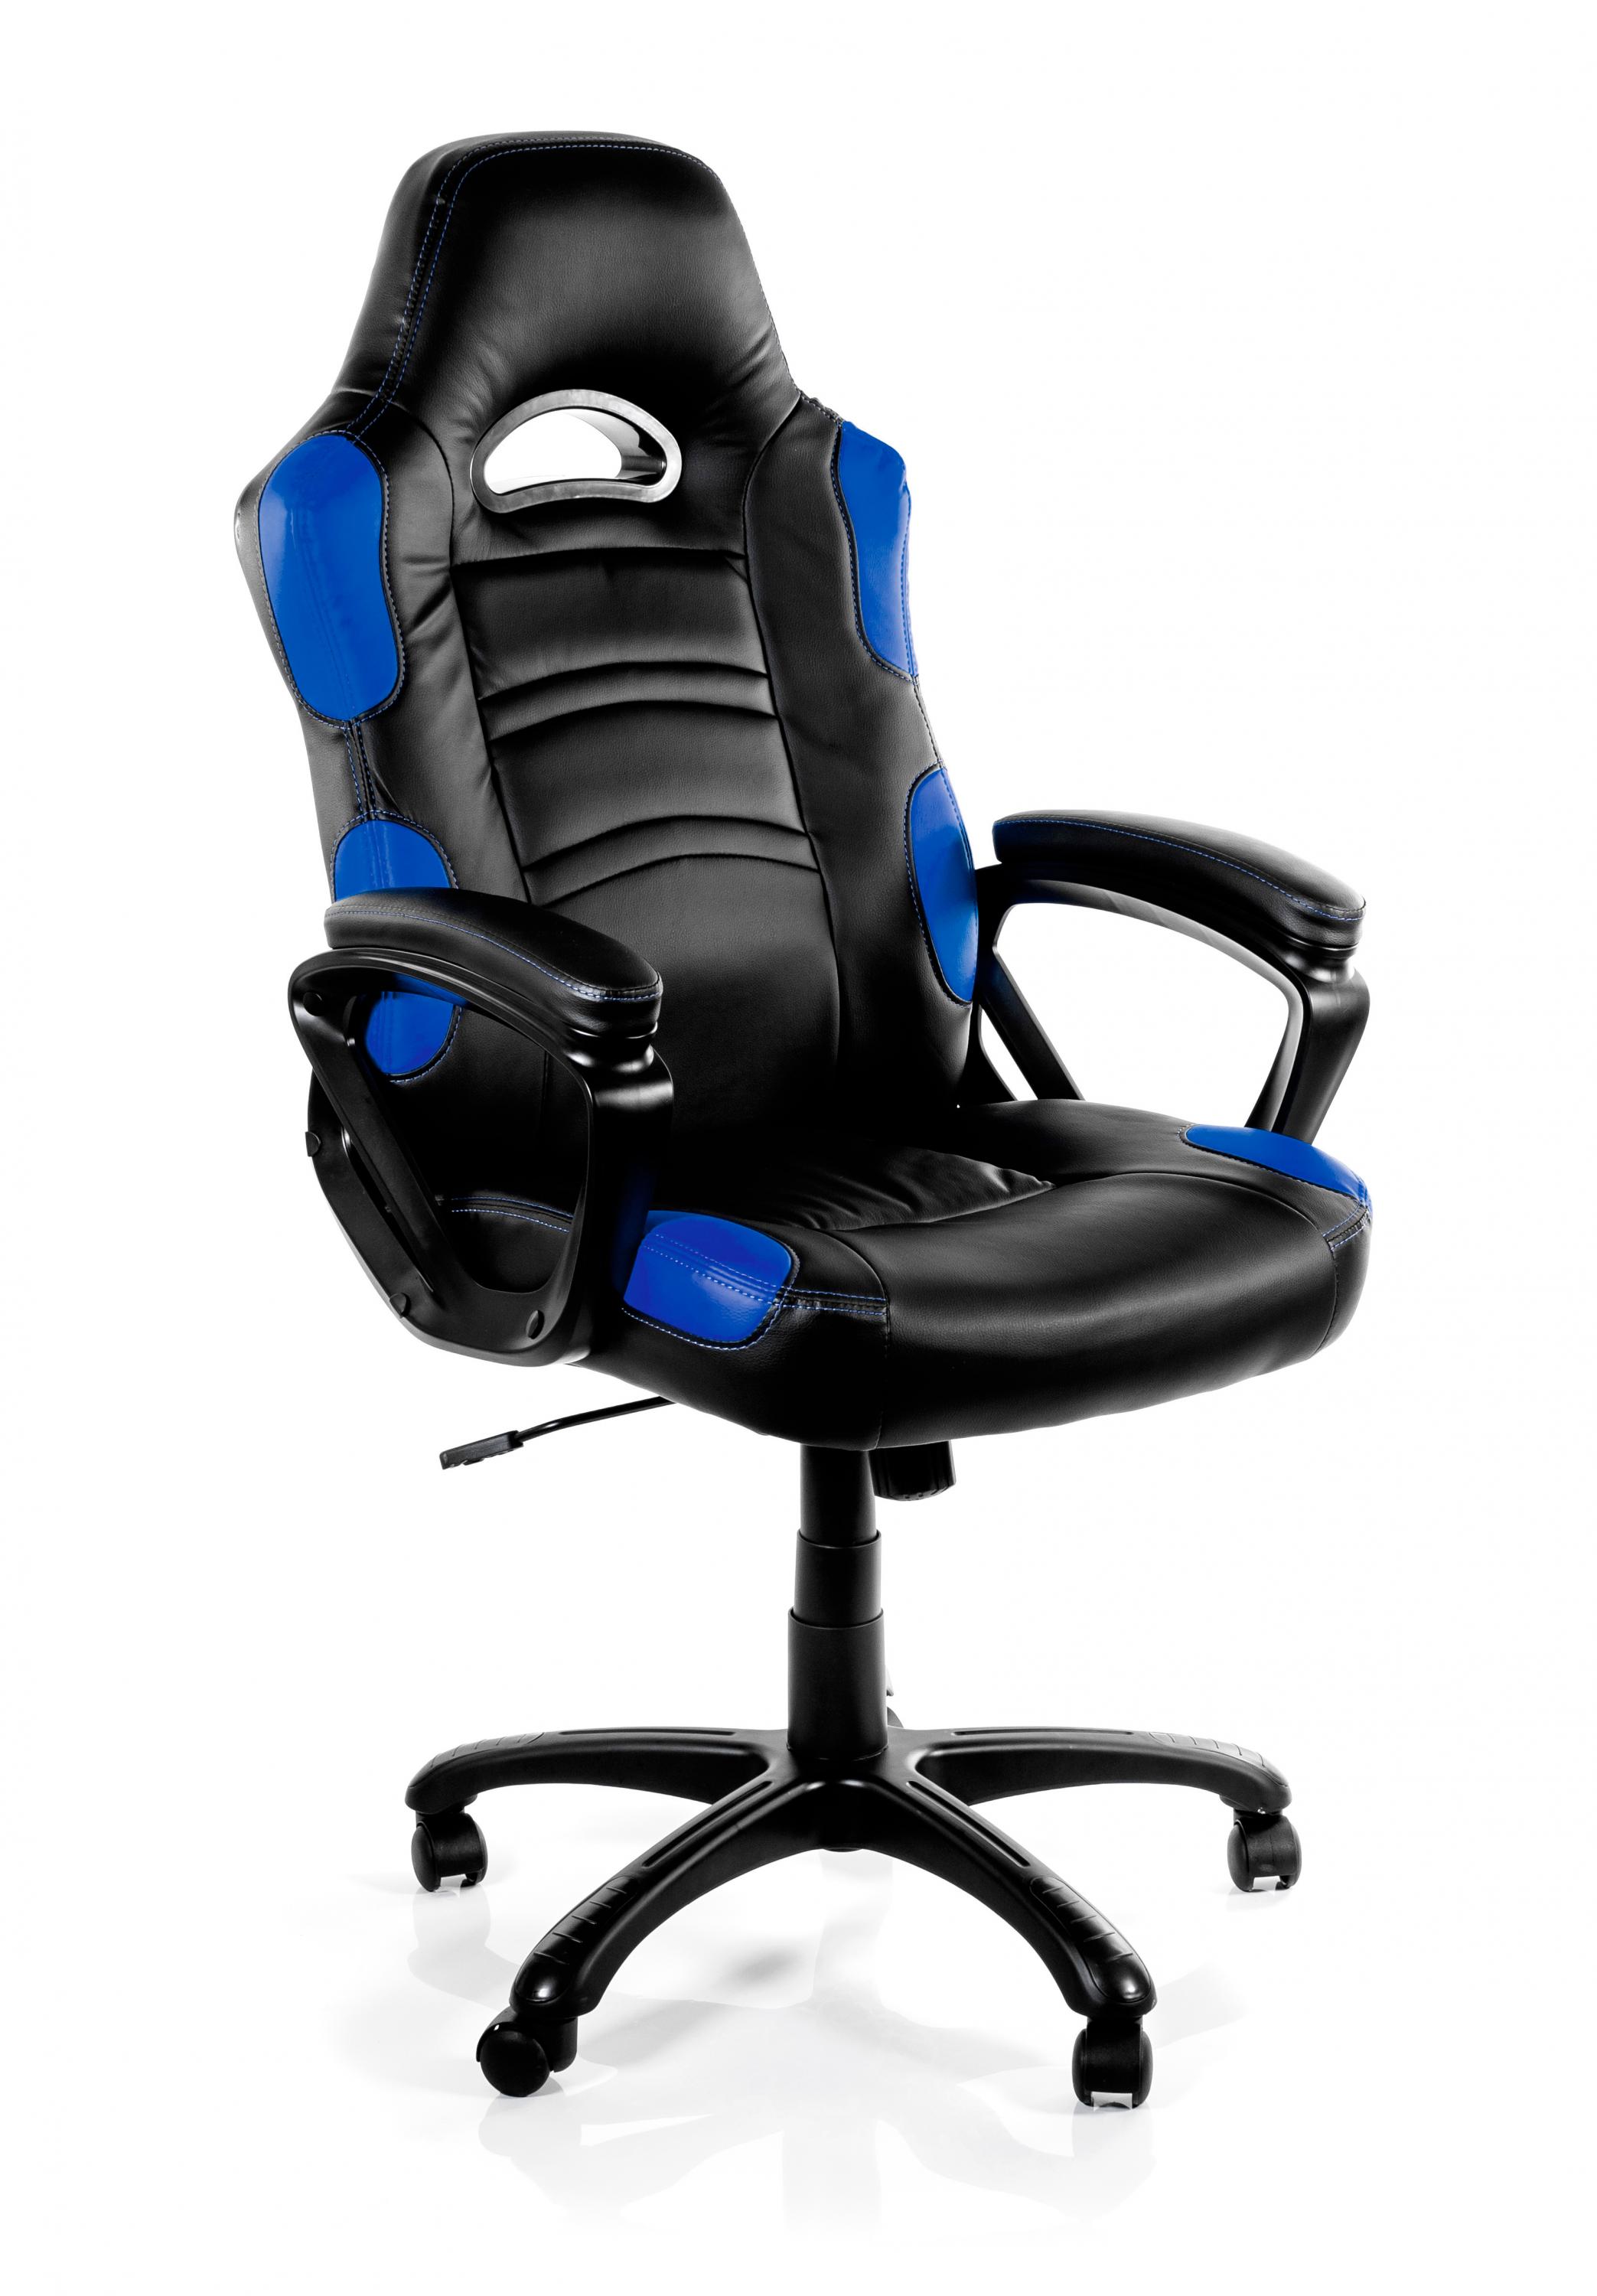 Best Computer Gaming Chair Playstation Bestgaminglaptops Chair Design